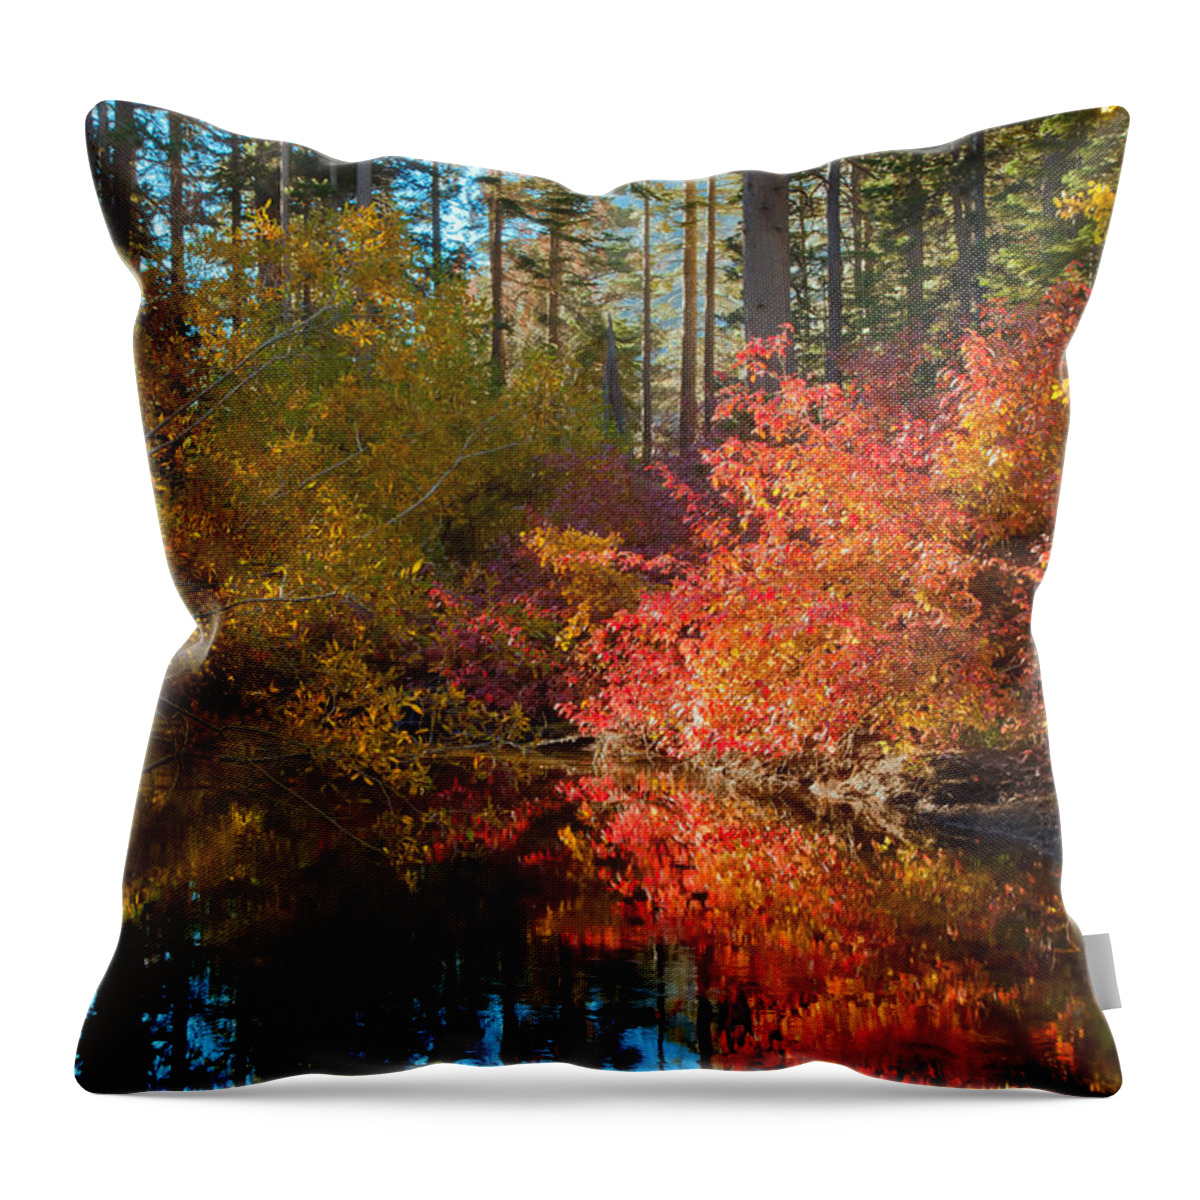 Landscape Throw Pillow featuring the photograph Morning Glow by Jonathan Nguyen